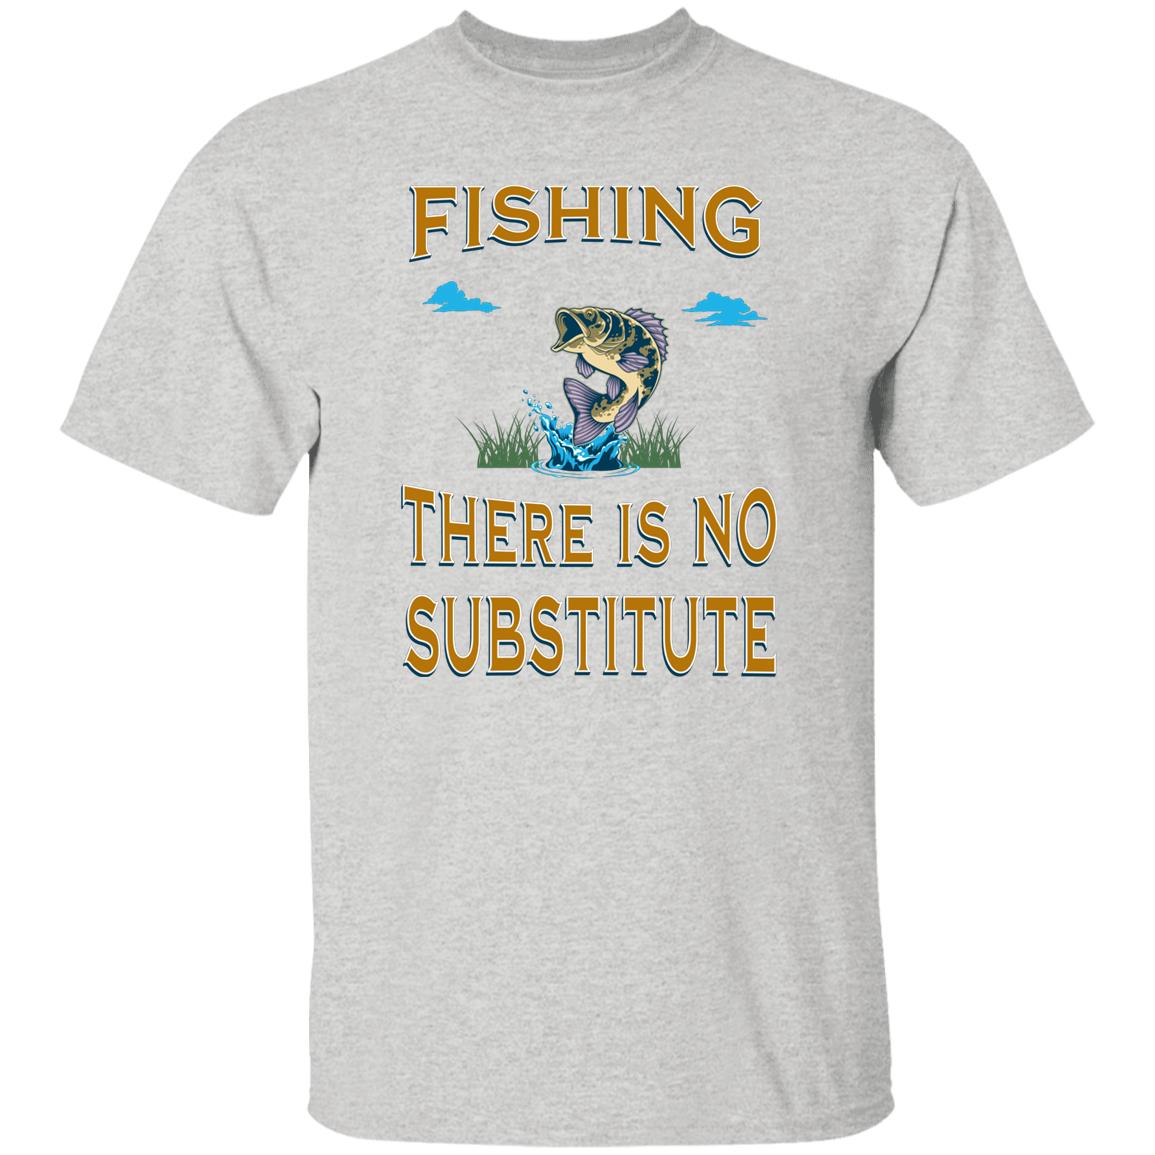 Fishing there is no substitute k t-shirt ash